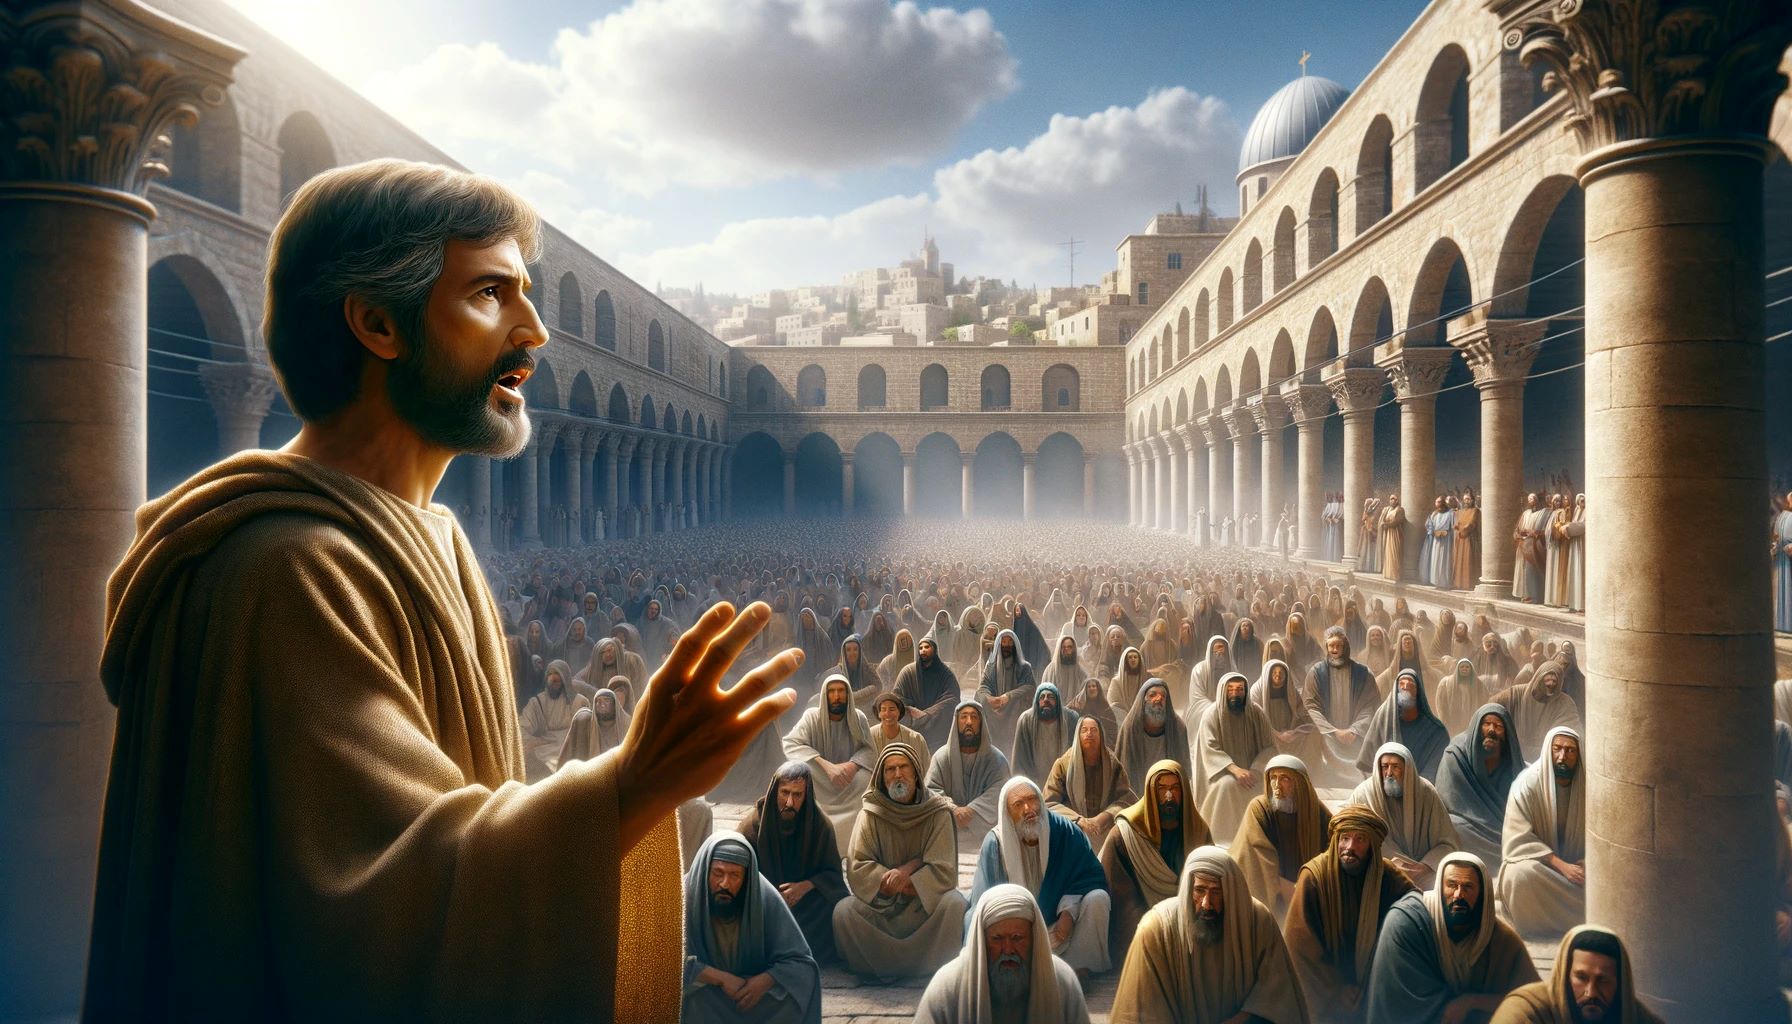 What Happened To The Apostles On Pentecost